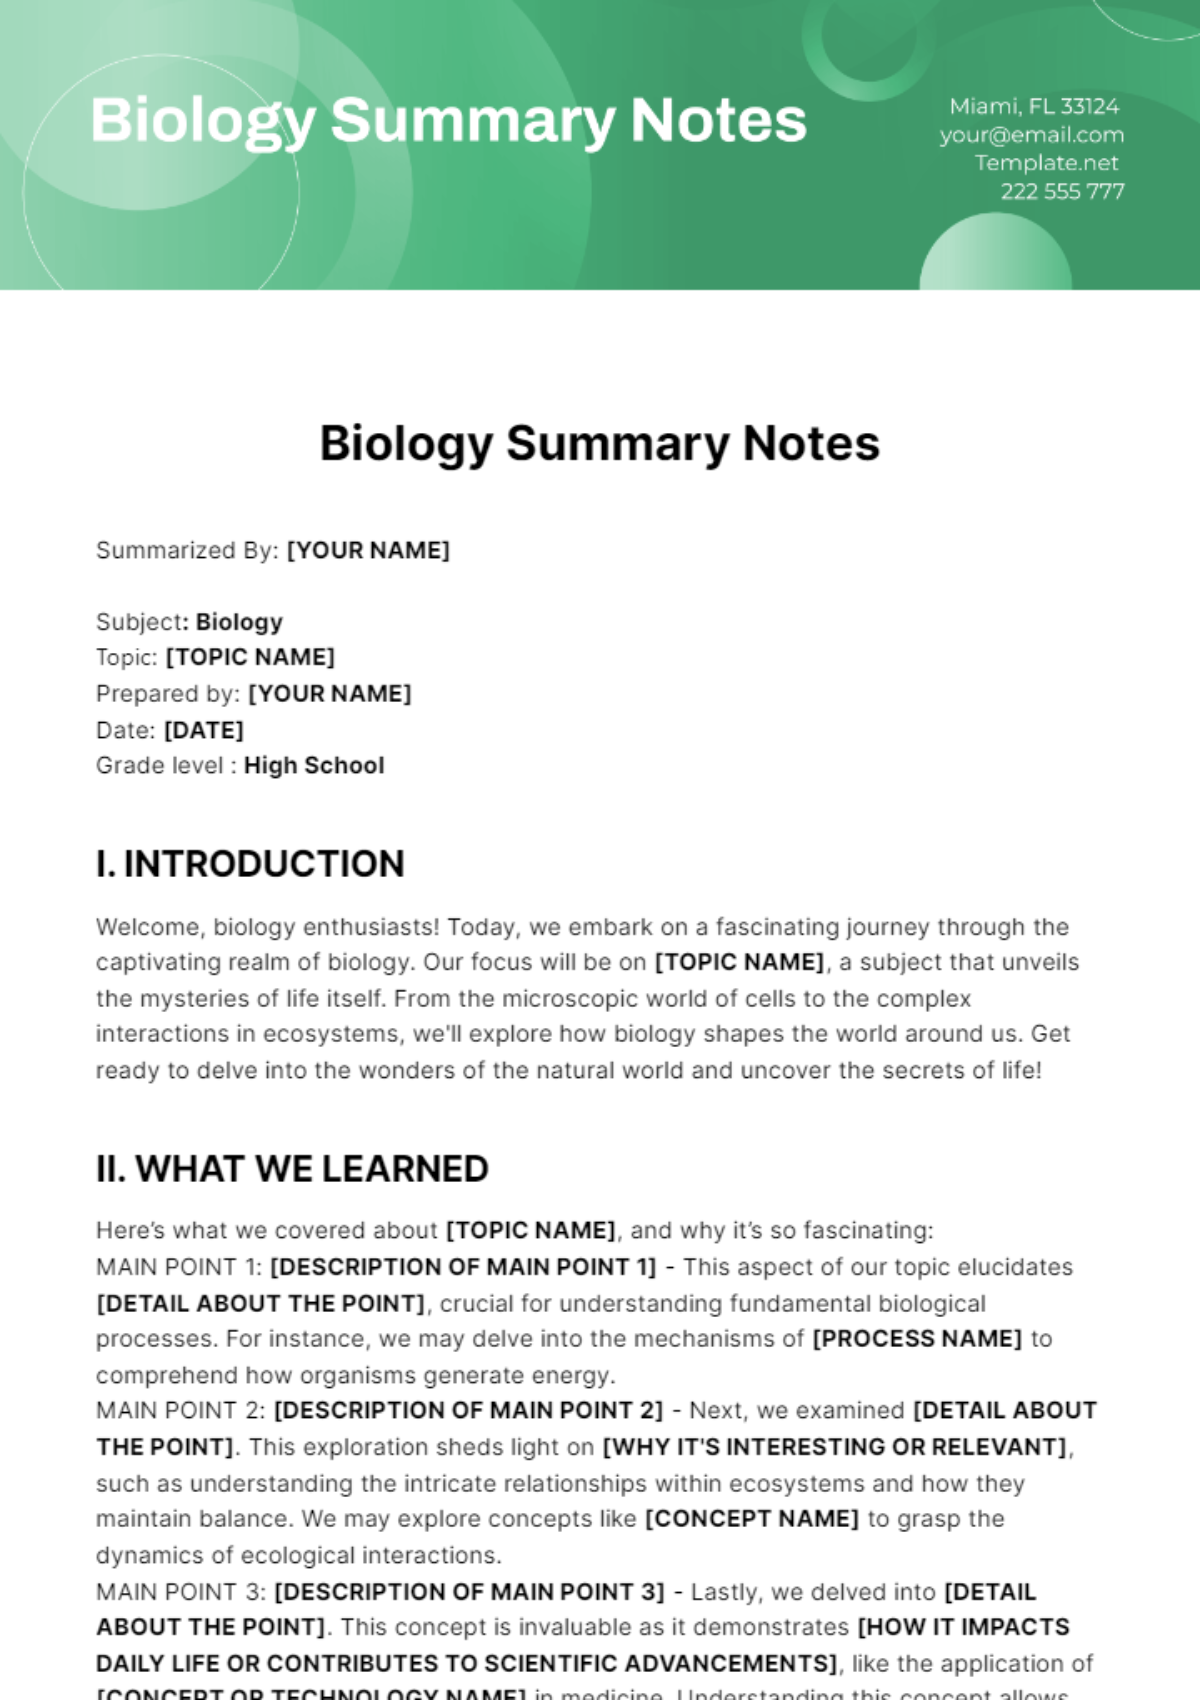 Biology Summary Notes Template